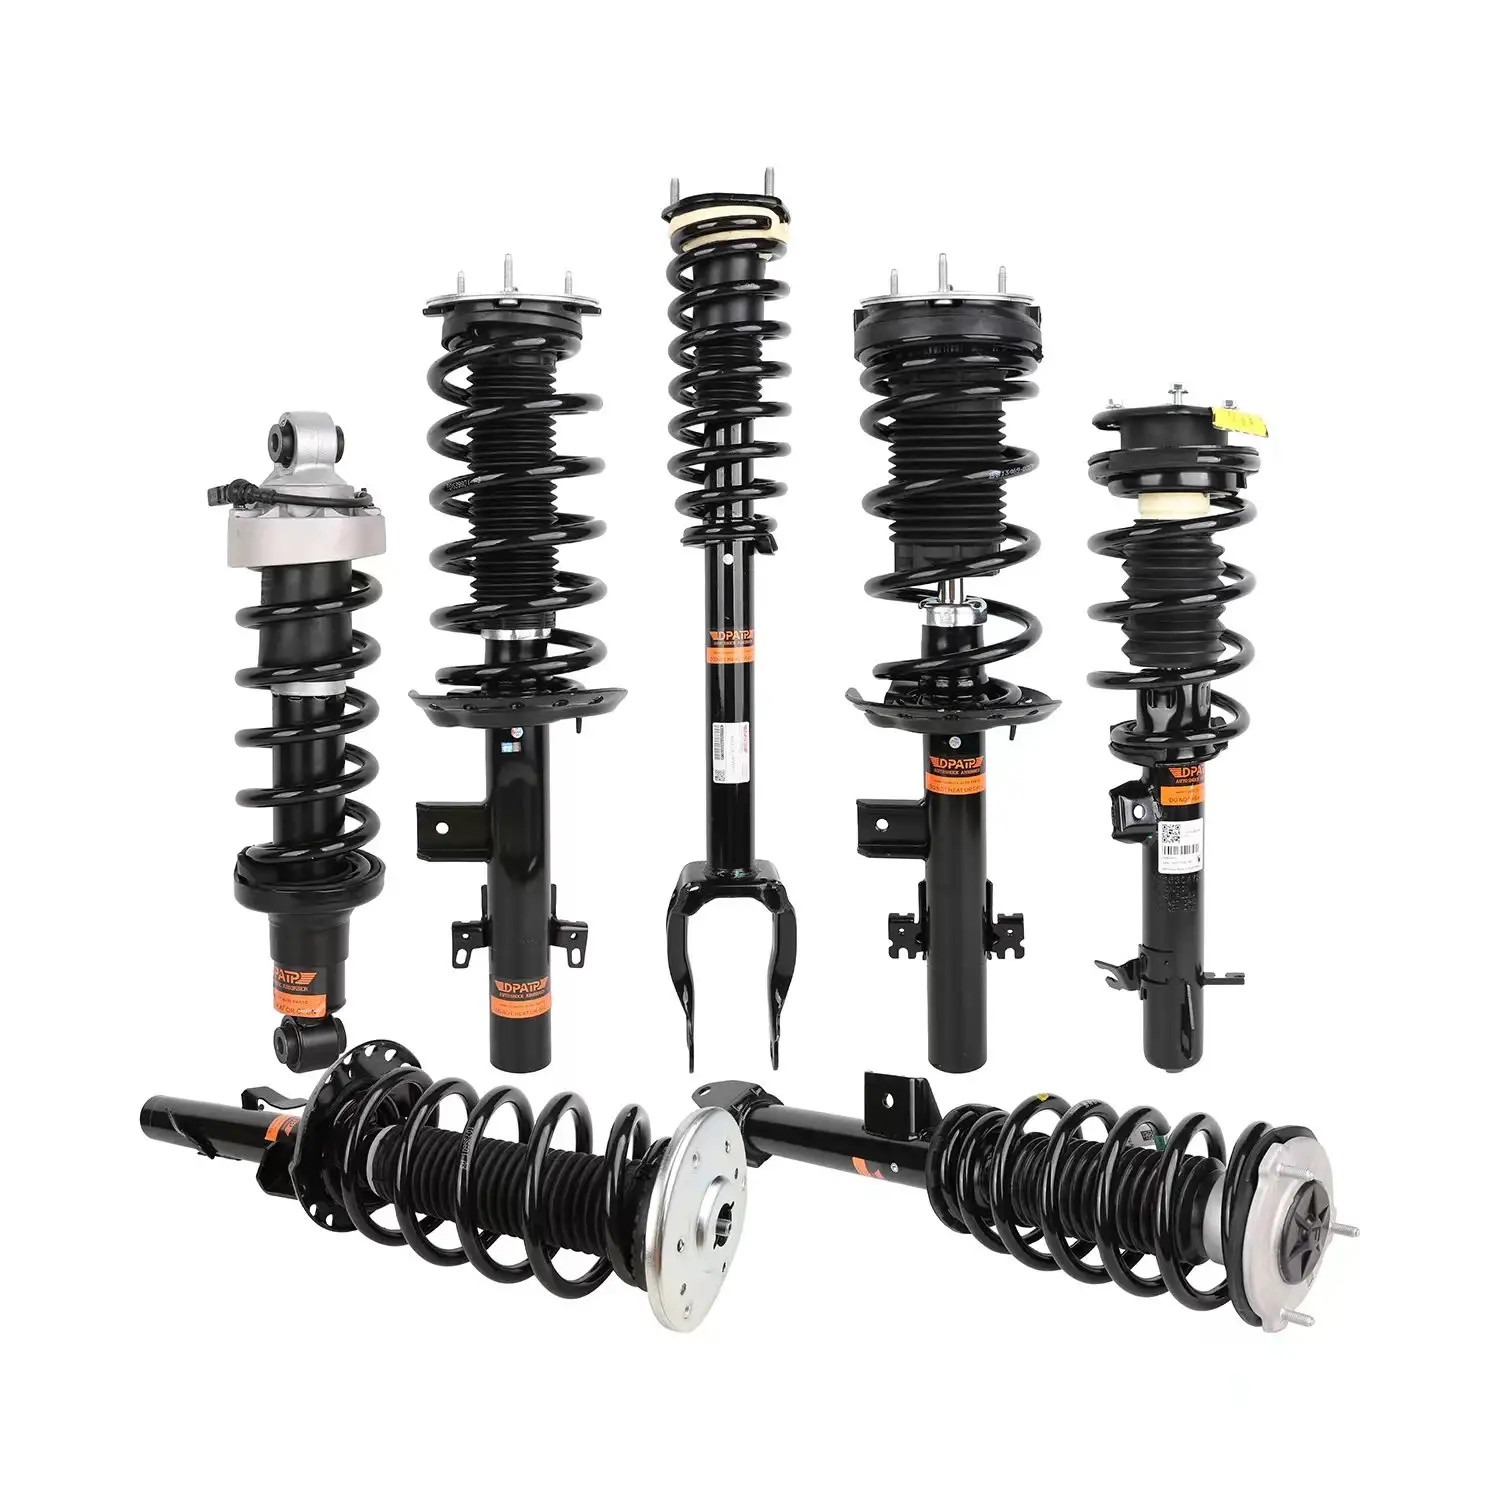 OEM factory price Auto Parts Accessories auto suspension systems genuine car shock absorbers for cars for Volvo XC90